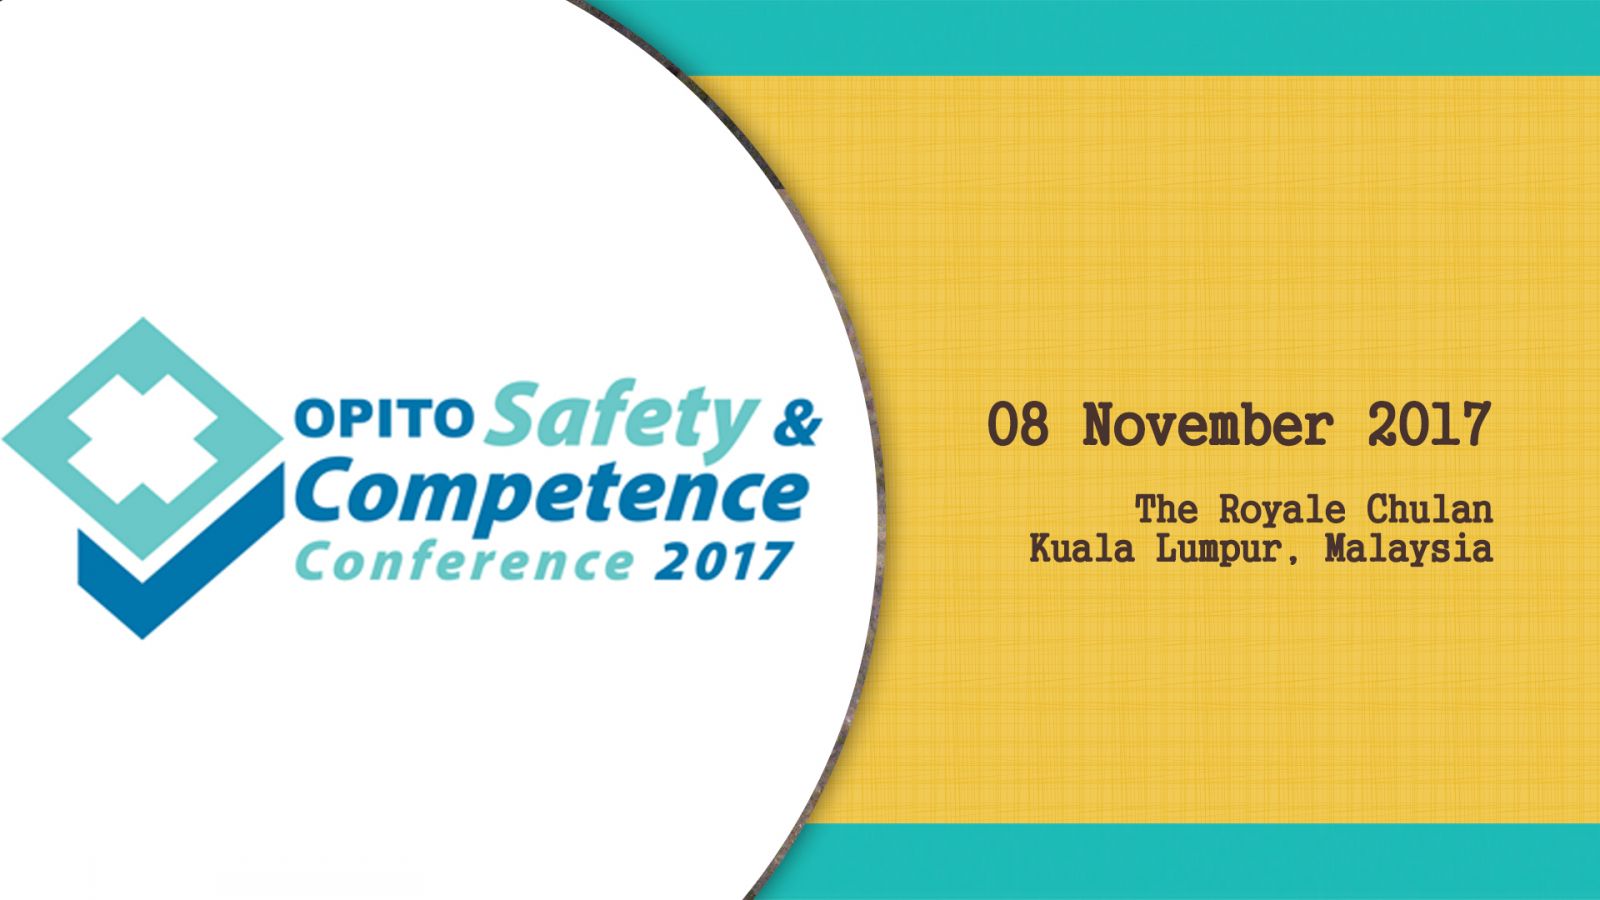 OPITO Safety & Competence Conference 2017 Event Banner